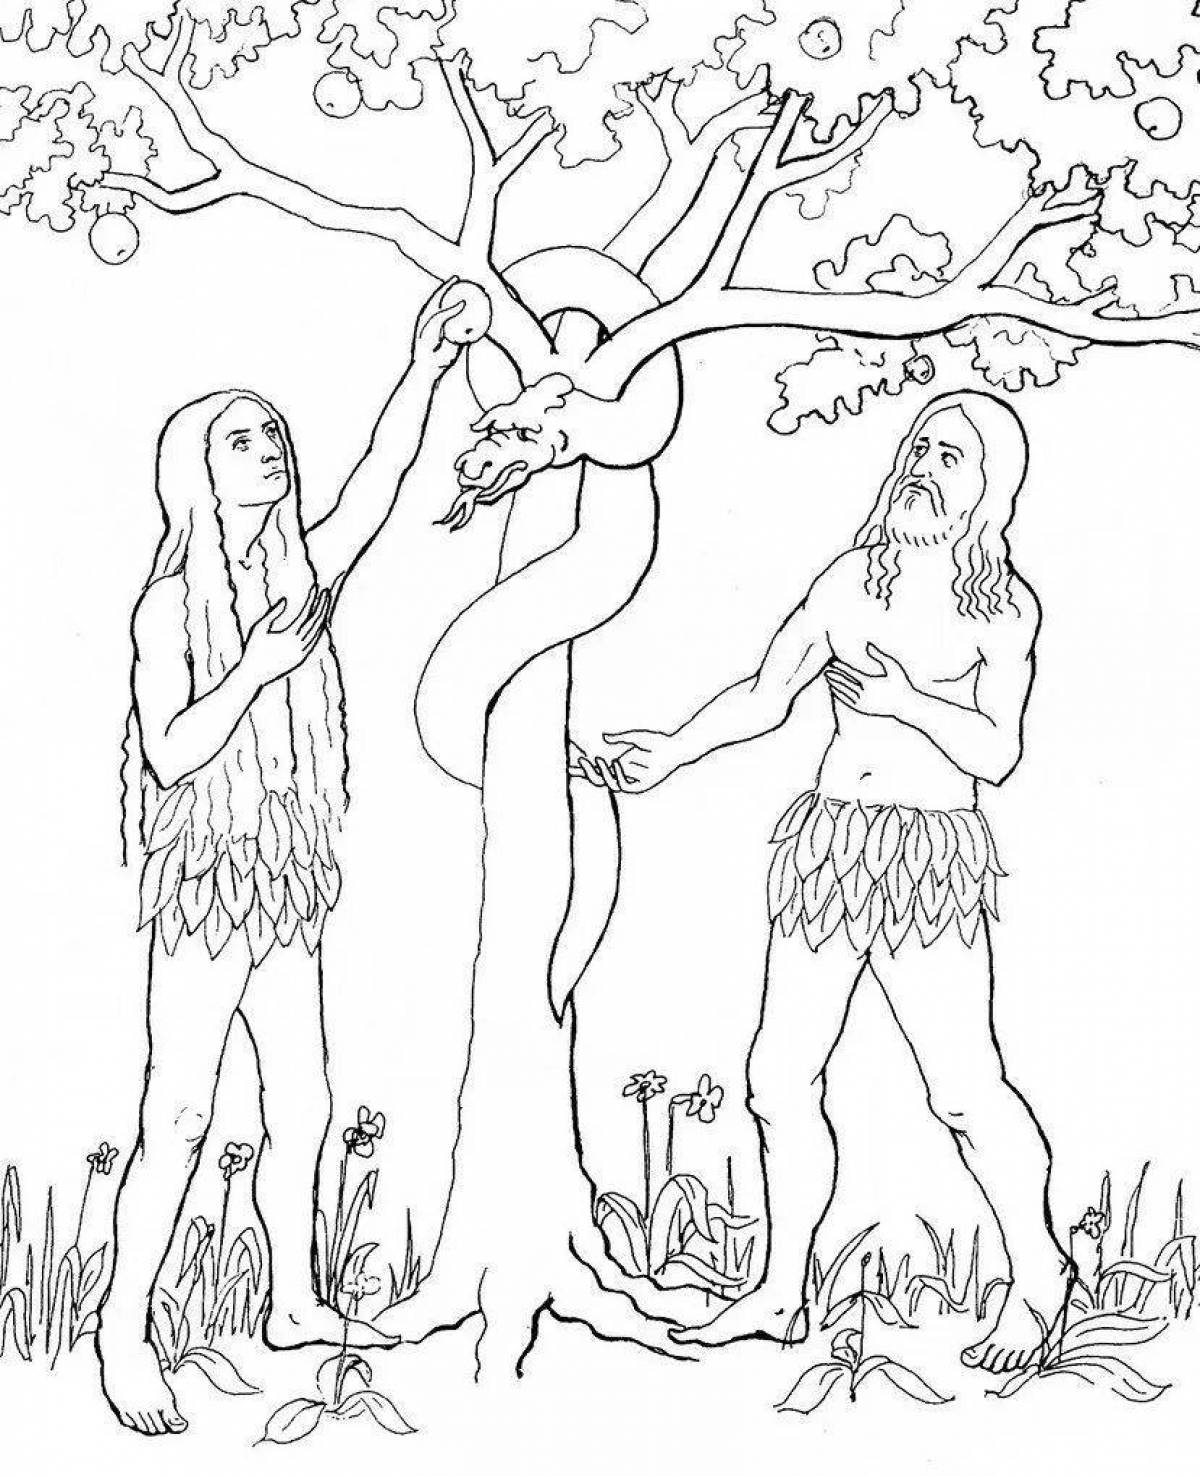 Colorful adam and eve coloring page